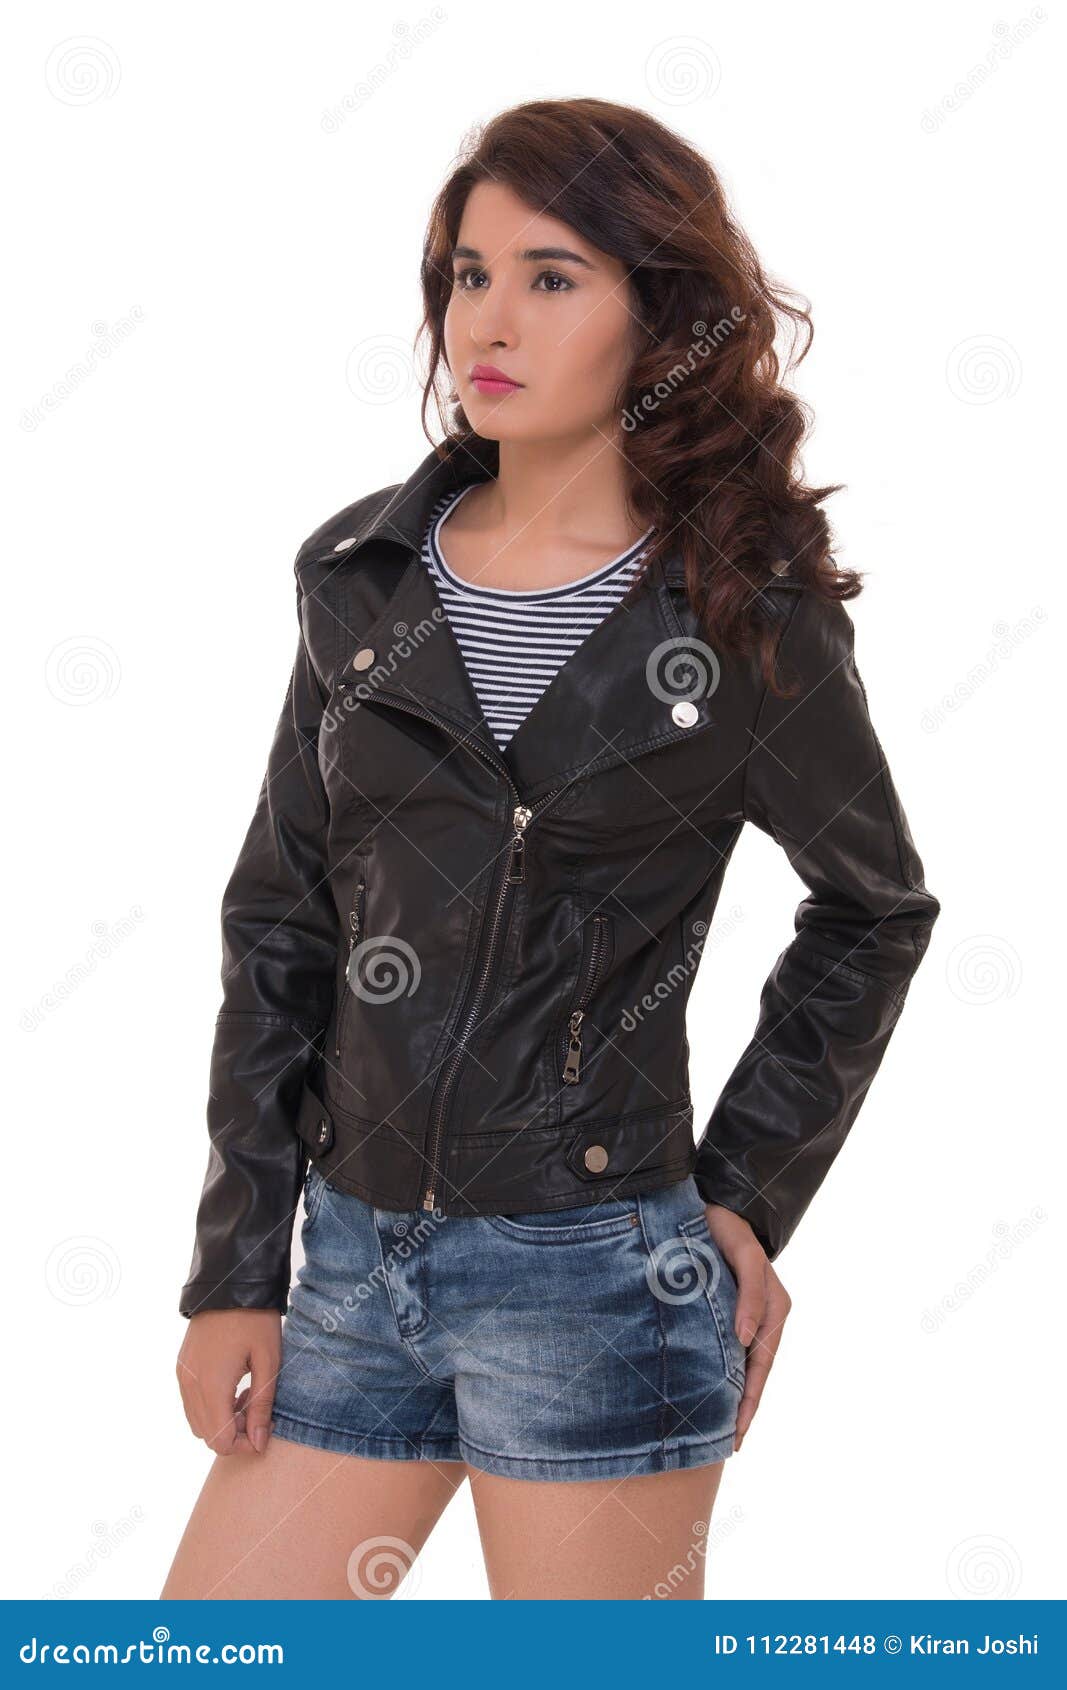 Fashion Attitude Girl with the Front Pose Stock Photo - Image of ...